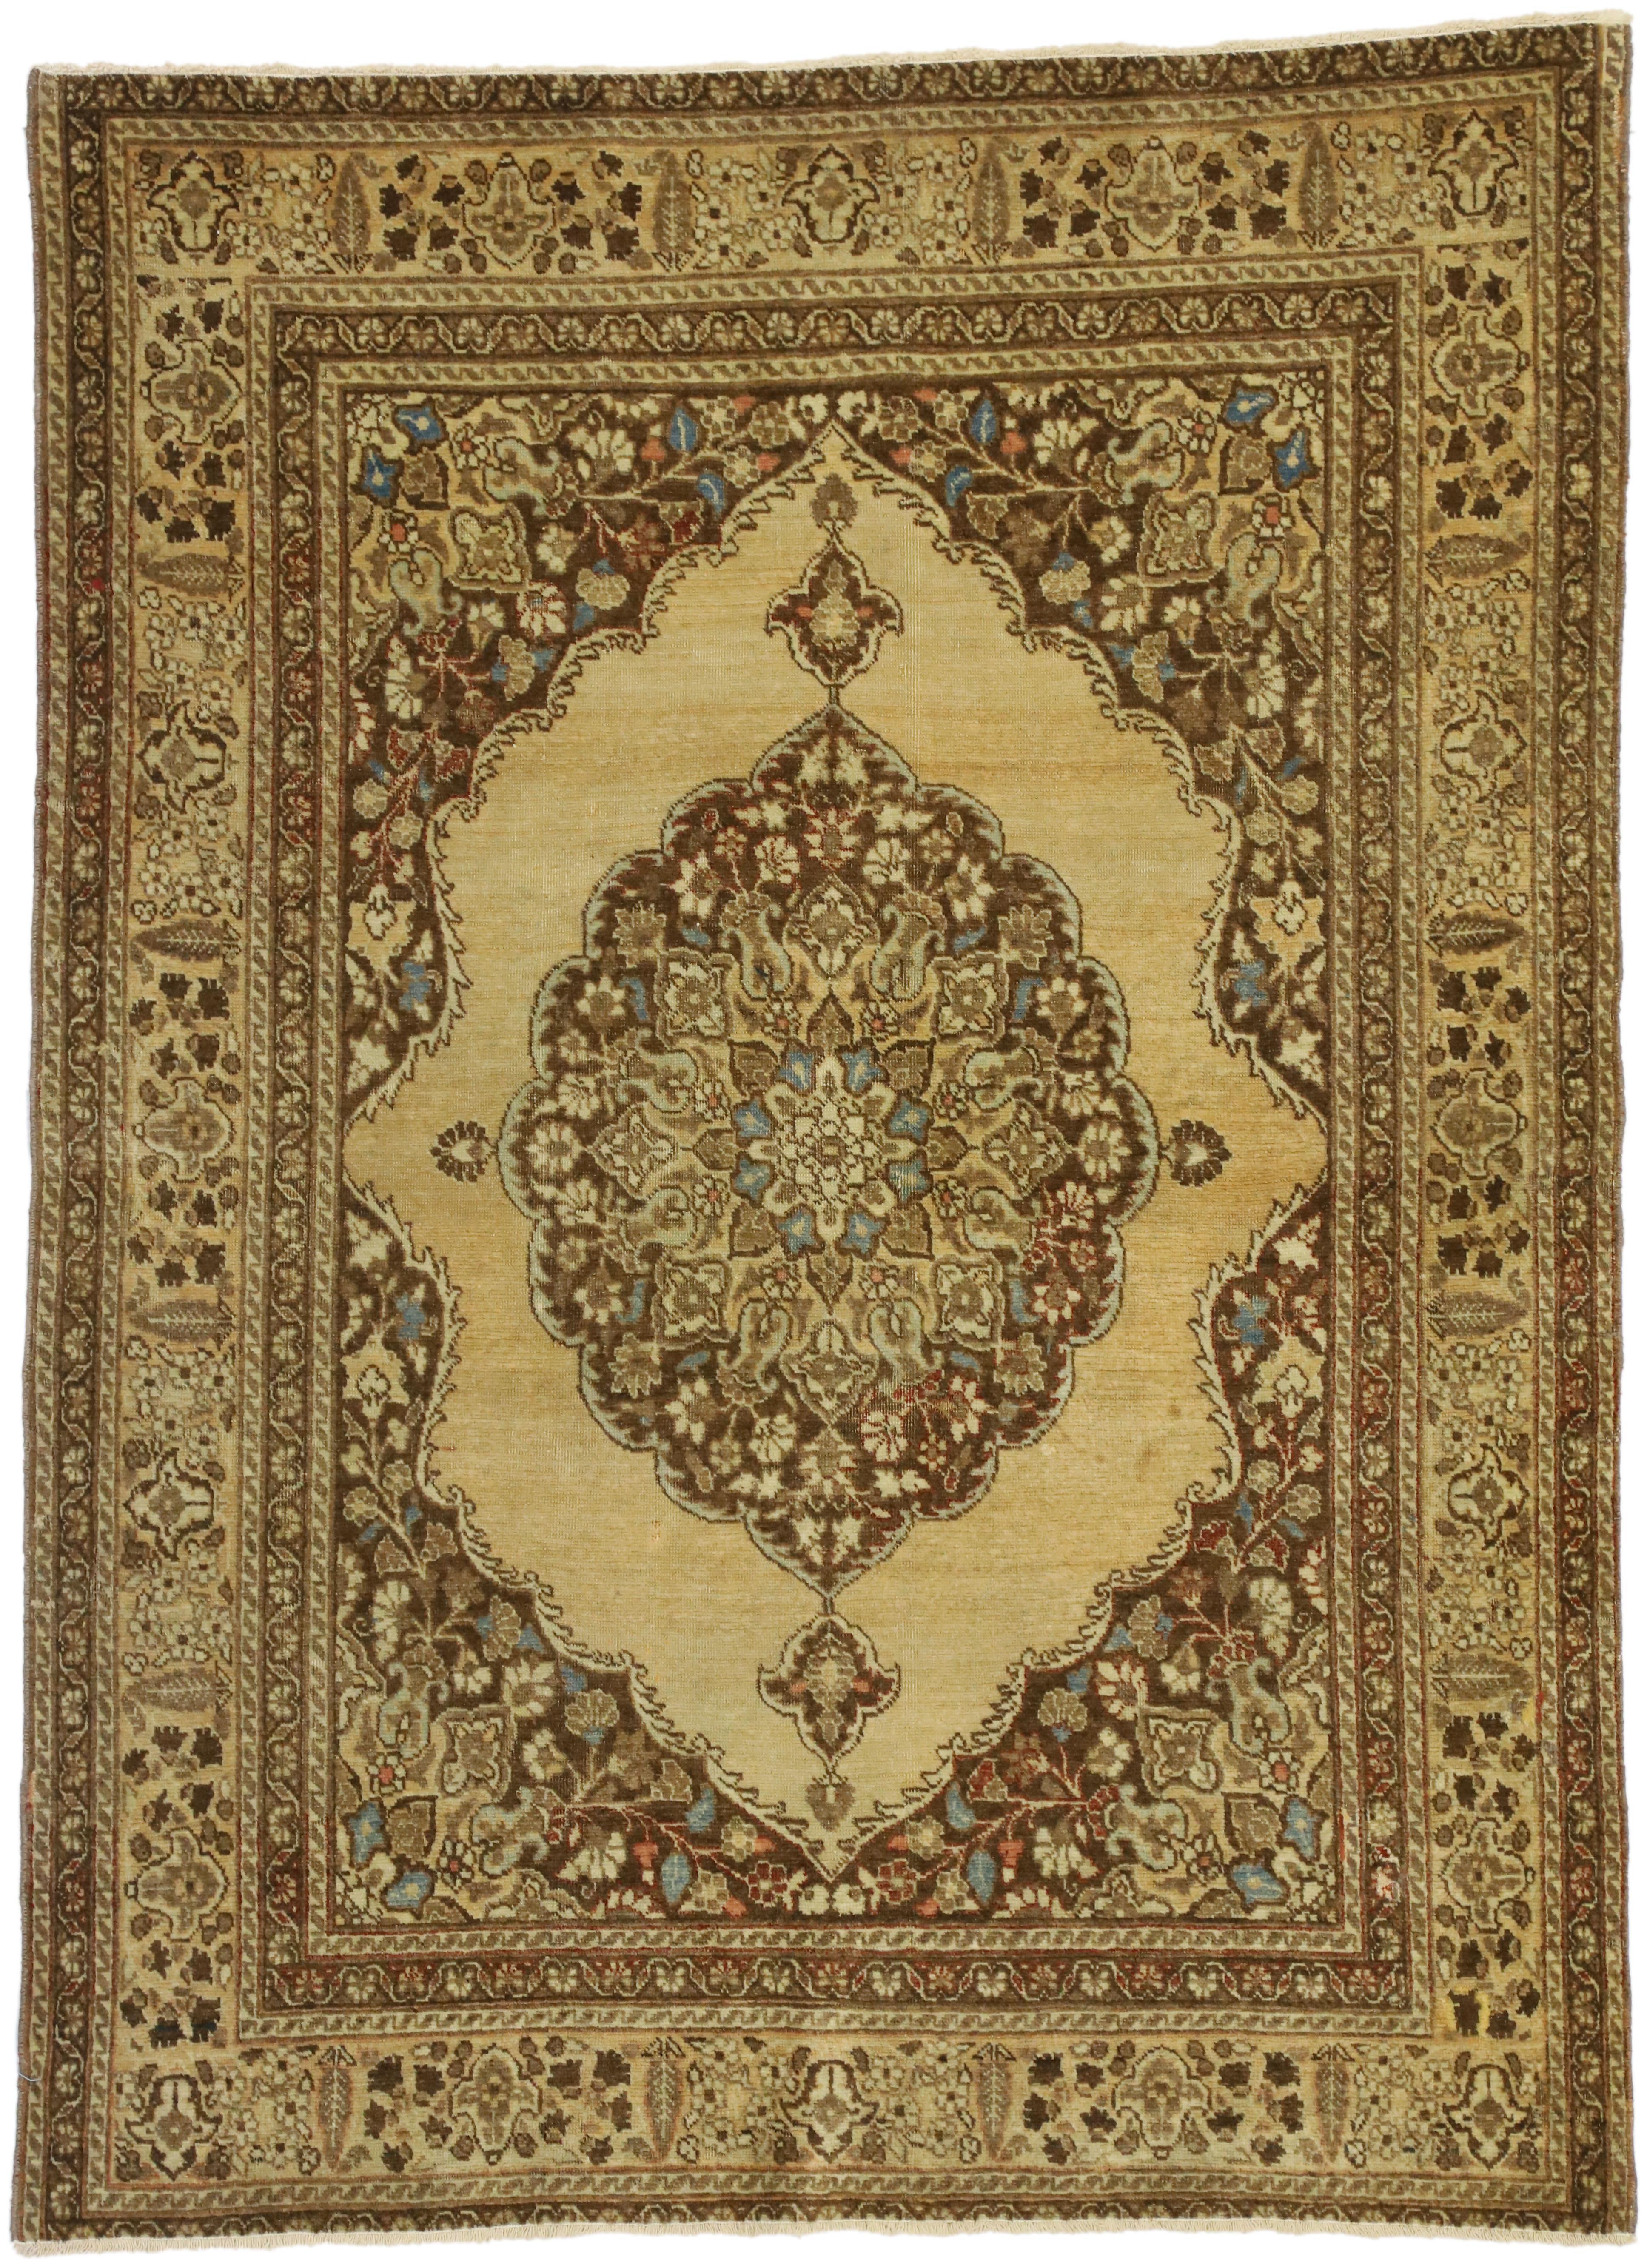 50671 Distressed Antique Persian Tabriz Accent Rug with Rustic Artisan Style 04'00 x 05'04. This hand-knotted wool distressed antique Persian Tabriz rug features a rustic artisan style in warm, neutral colors. Taking center stage, a large medallion